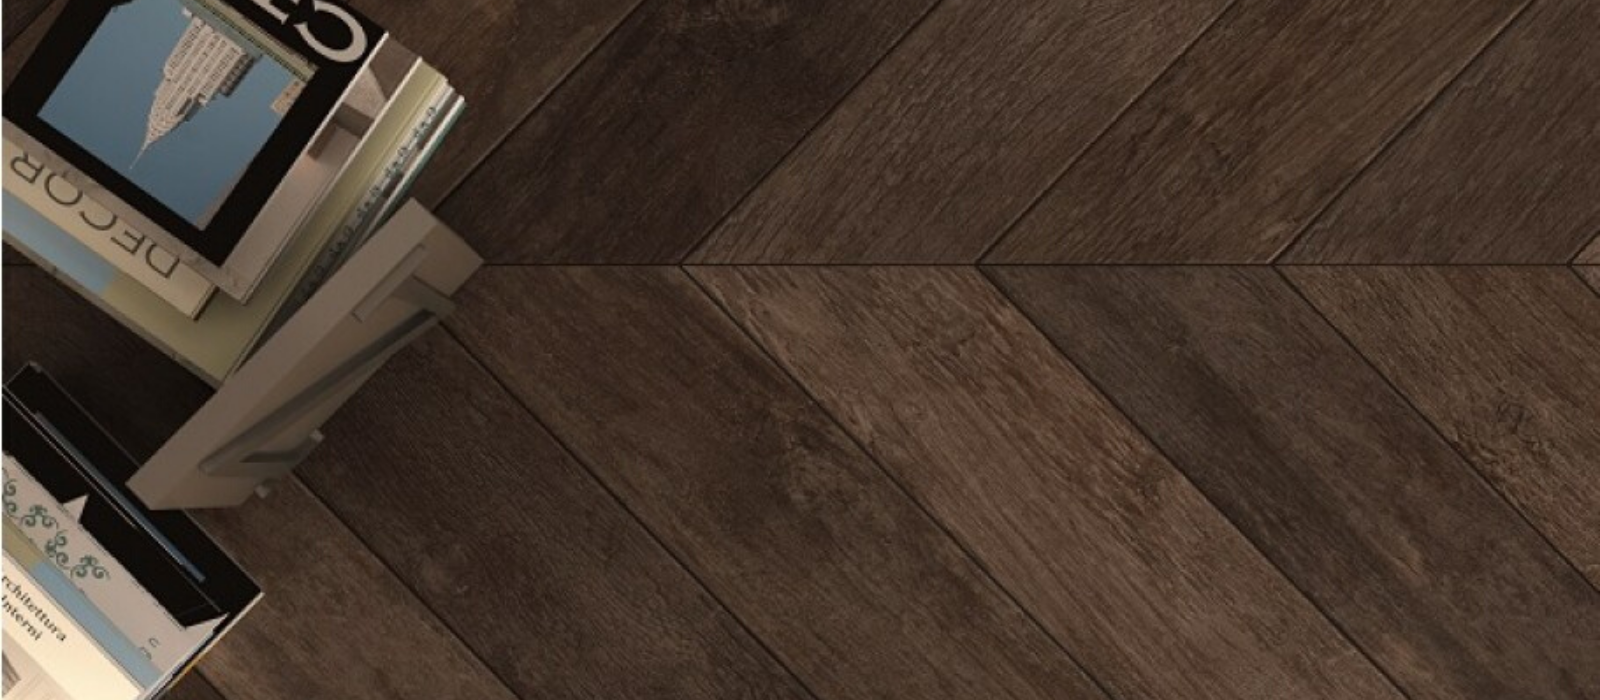 the traditional plank Wood look tile used on floor showing how the tiles can meet